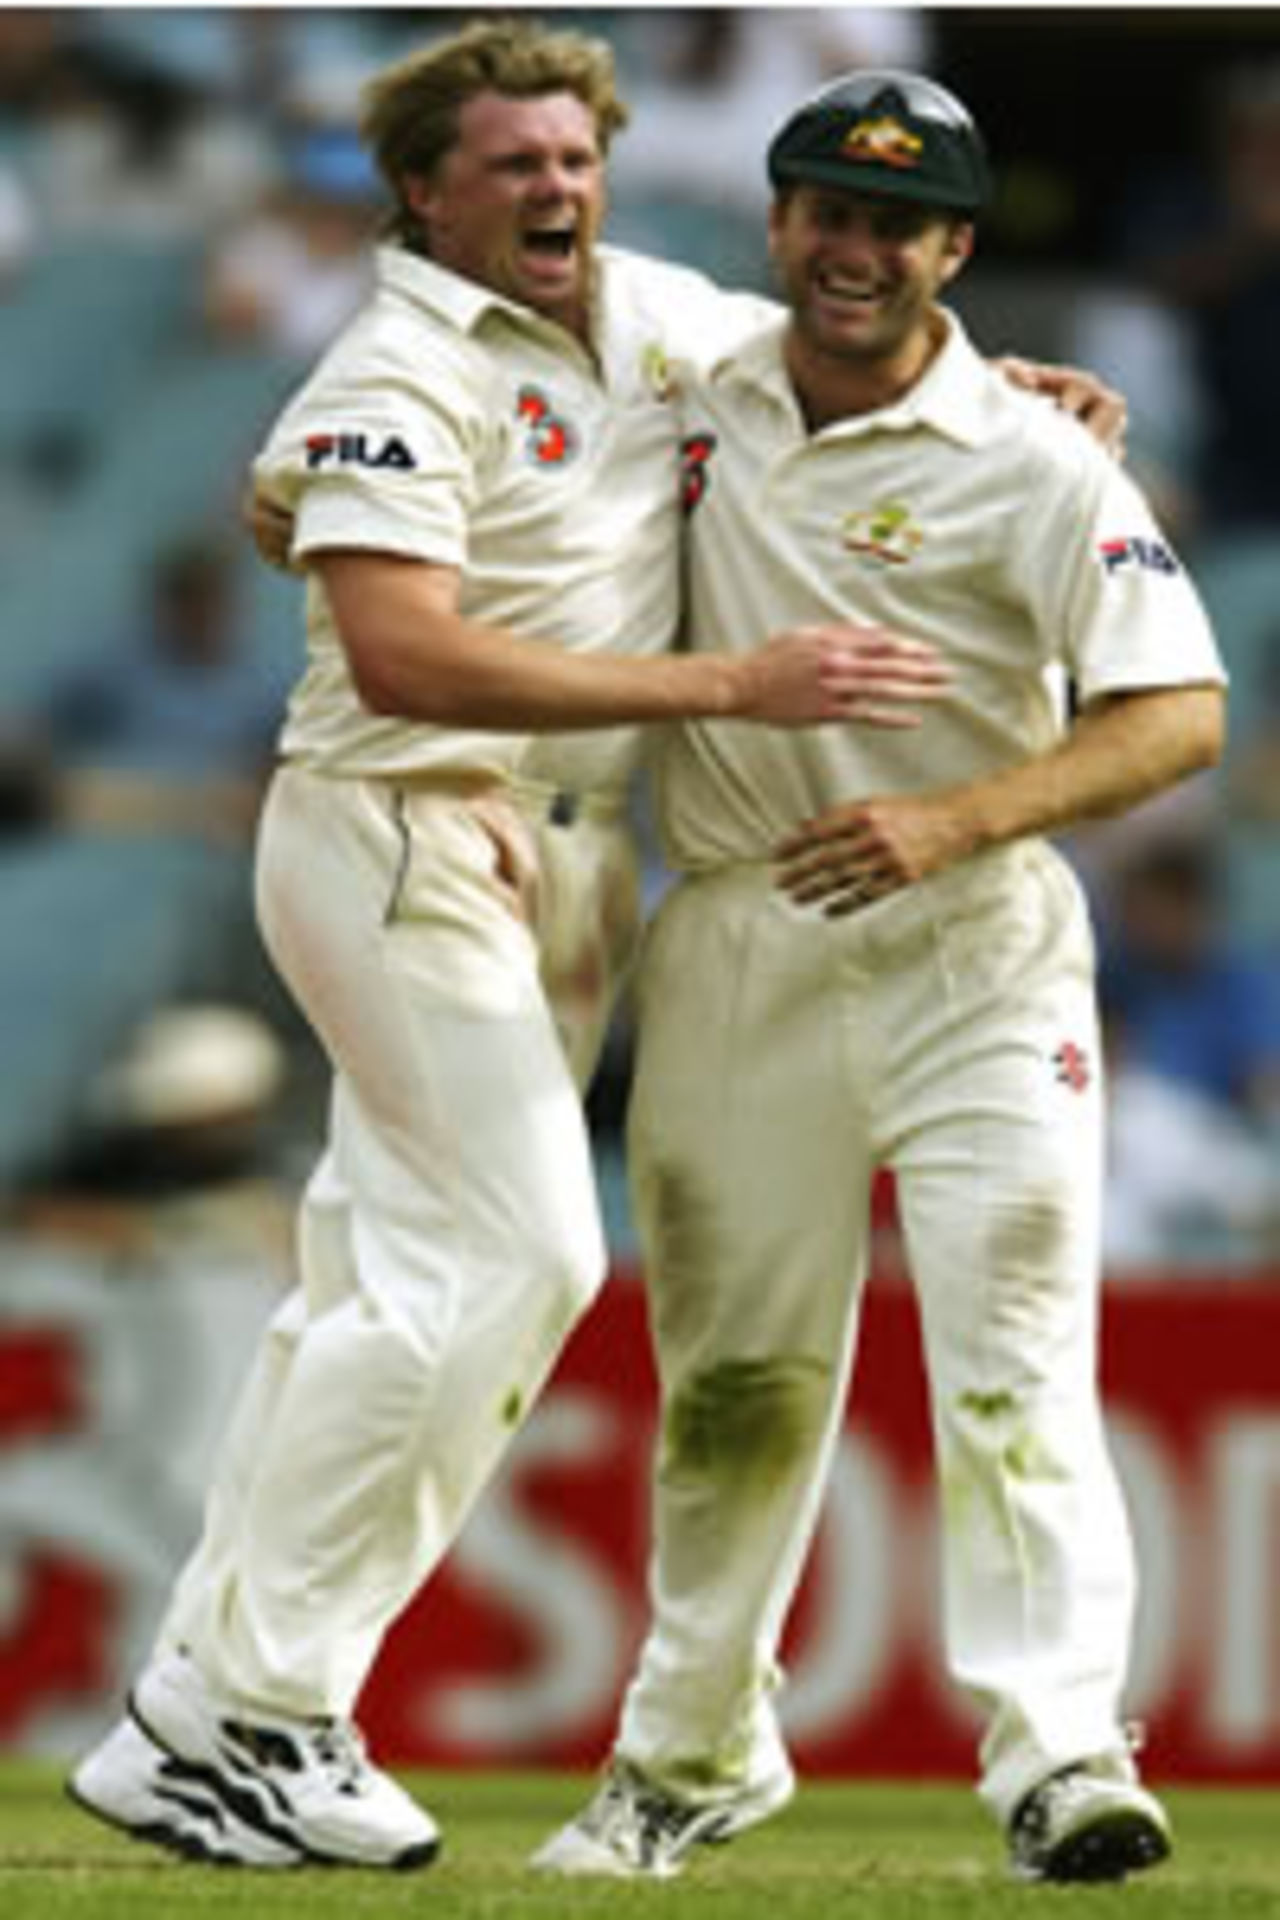 Brad Williams of Australia is congratulated by Simon Katich on the wicket of Anil Kumble during day four of the 3rd Test between Australia and India at the MCG on December 29, 2003 in Melbourne, Australia